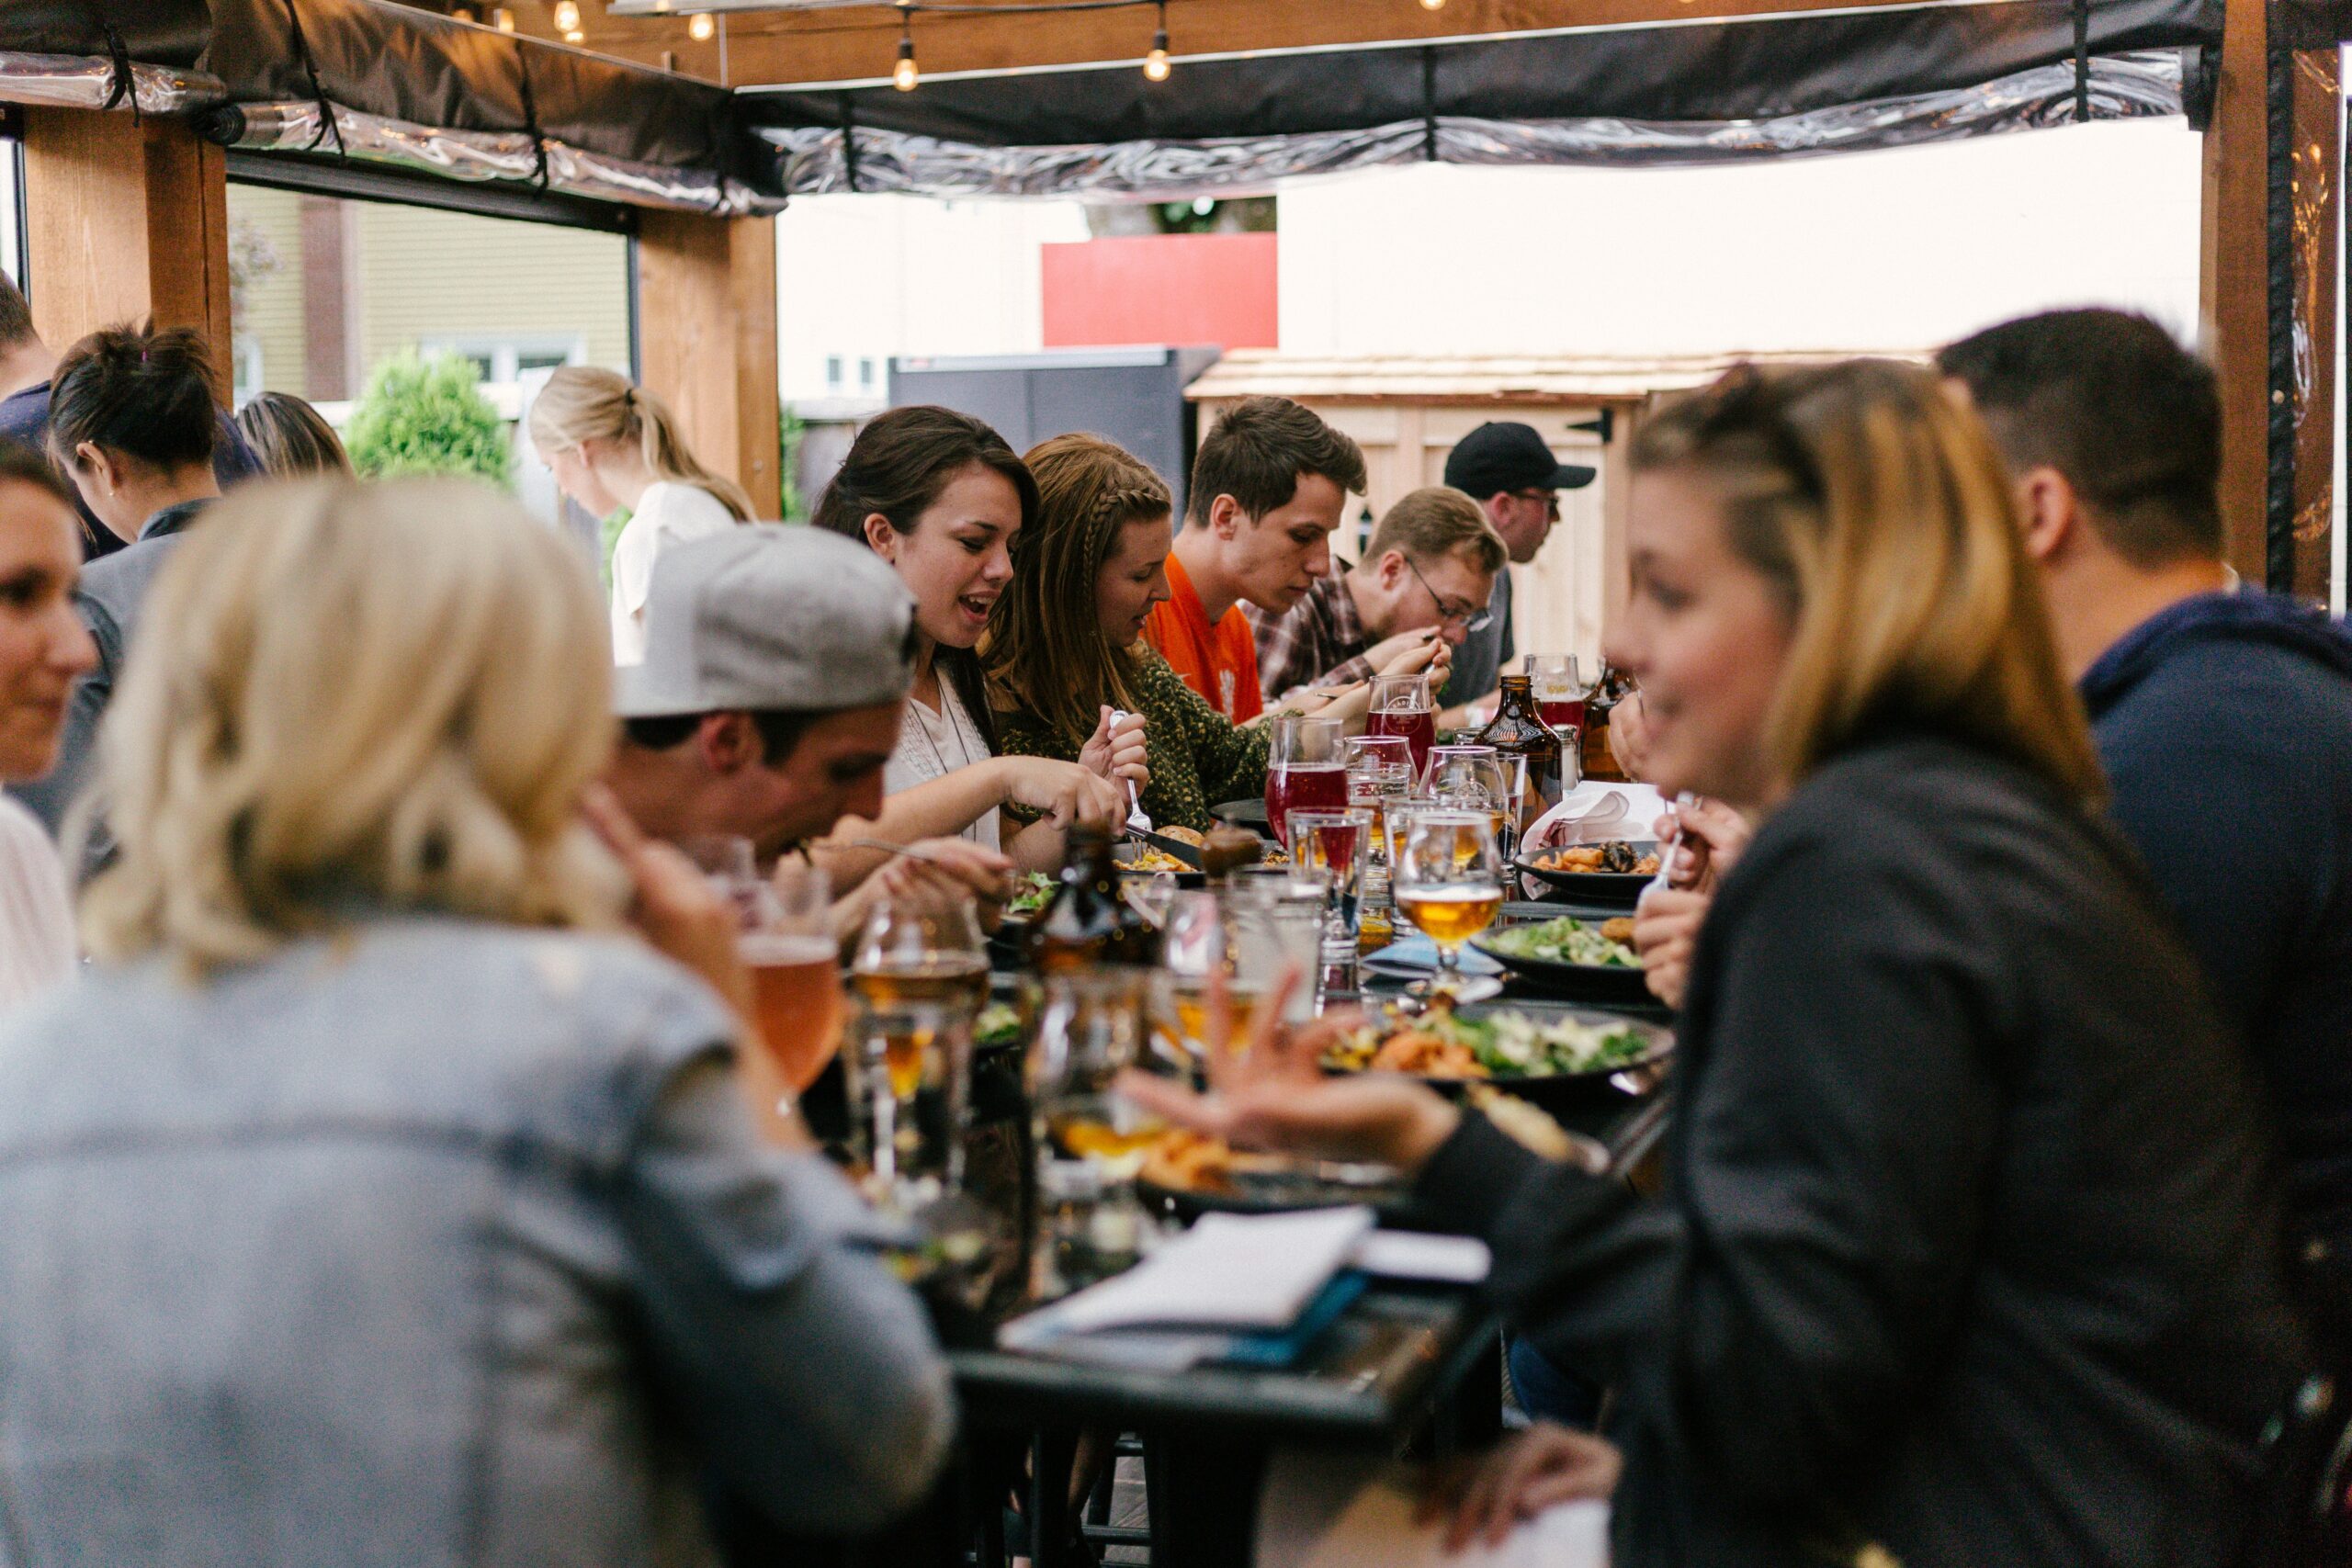 People eating a meal around a table. Photo by Priscilla Du Preez 🇨🇦 on Unsplash.